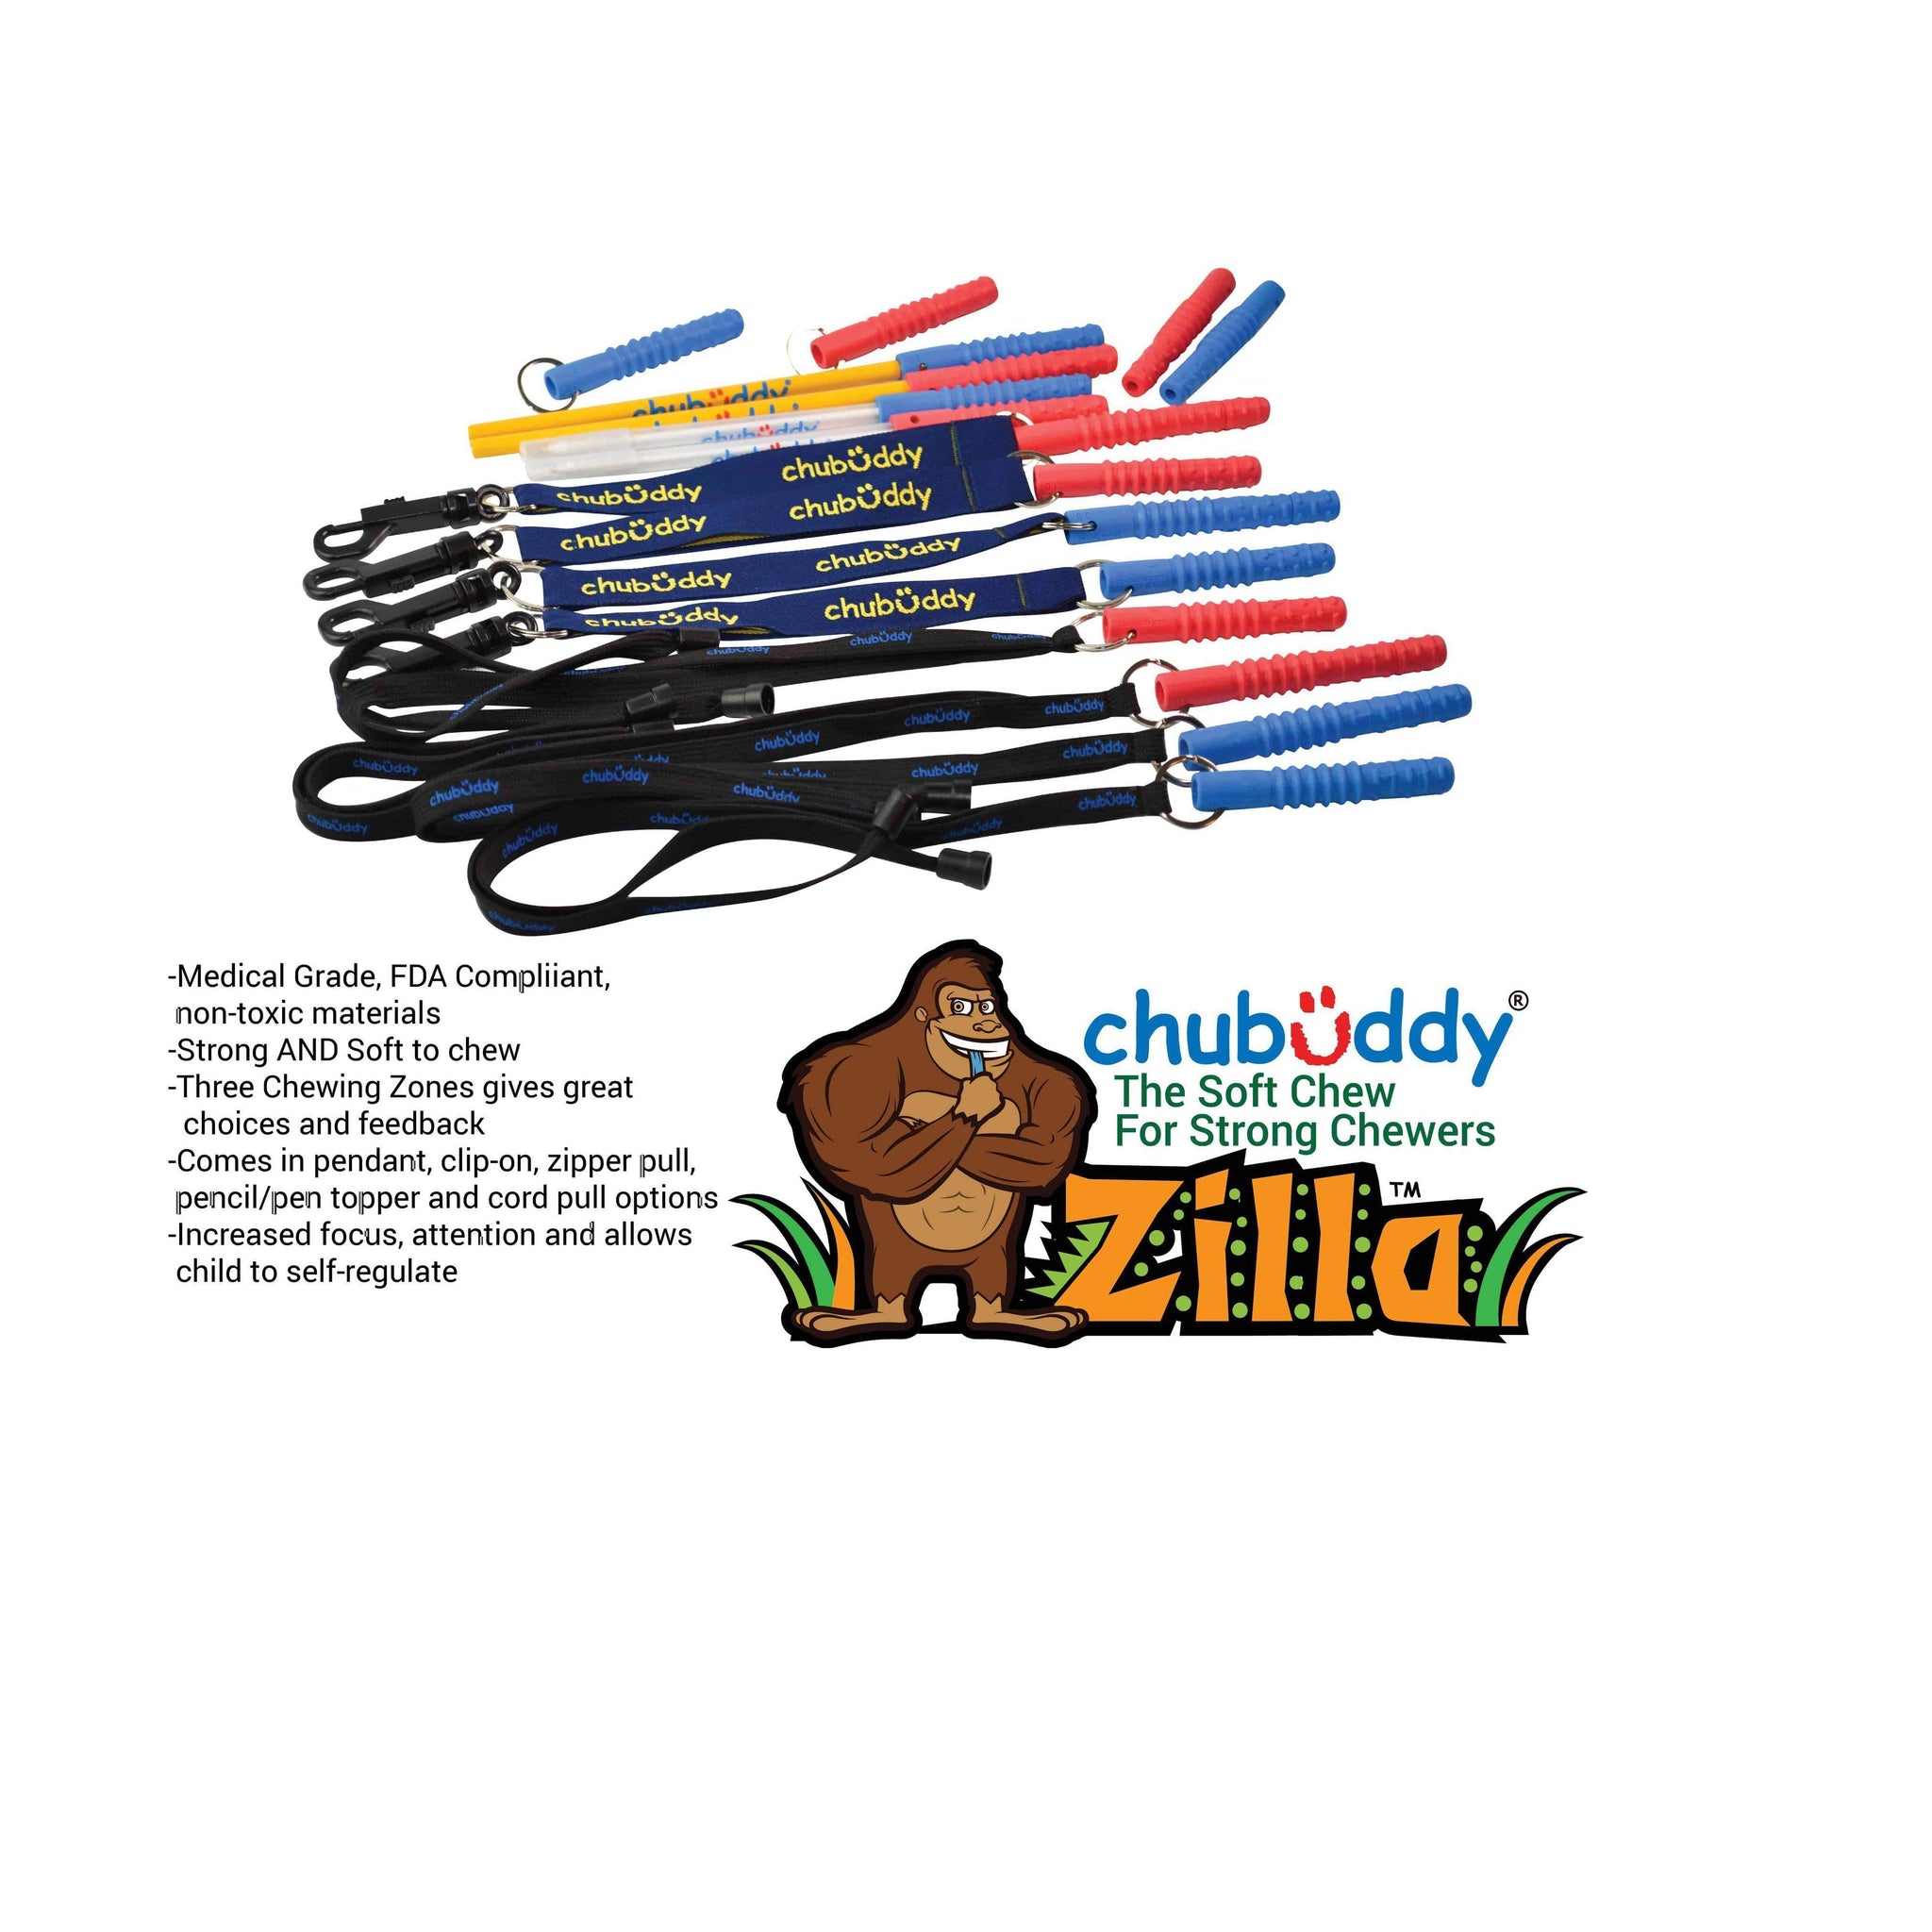 ChuBuddy Hood Zilla Royal Blue Adult with Red Cord Zillas